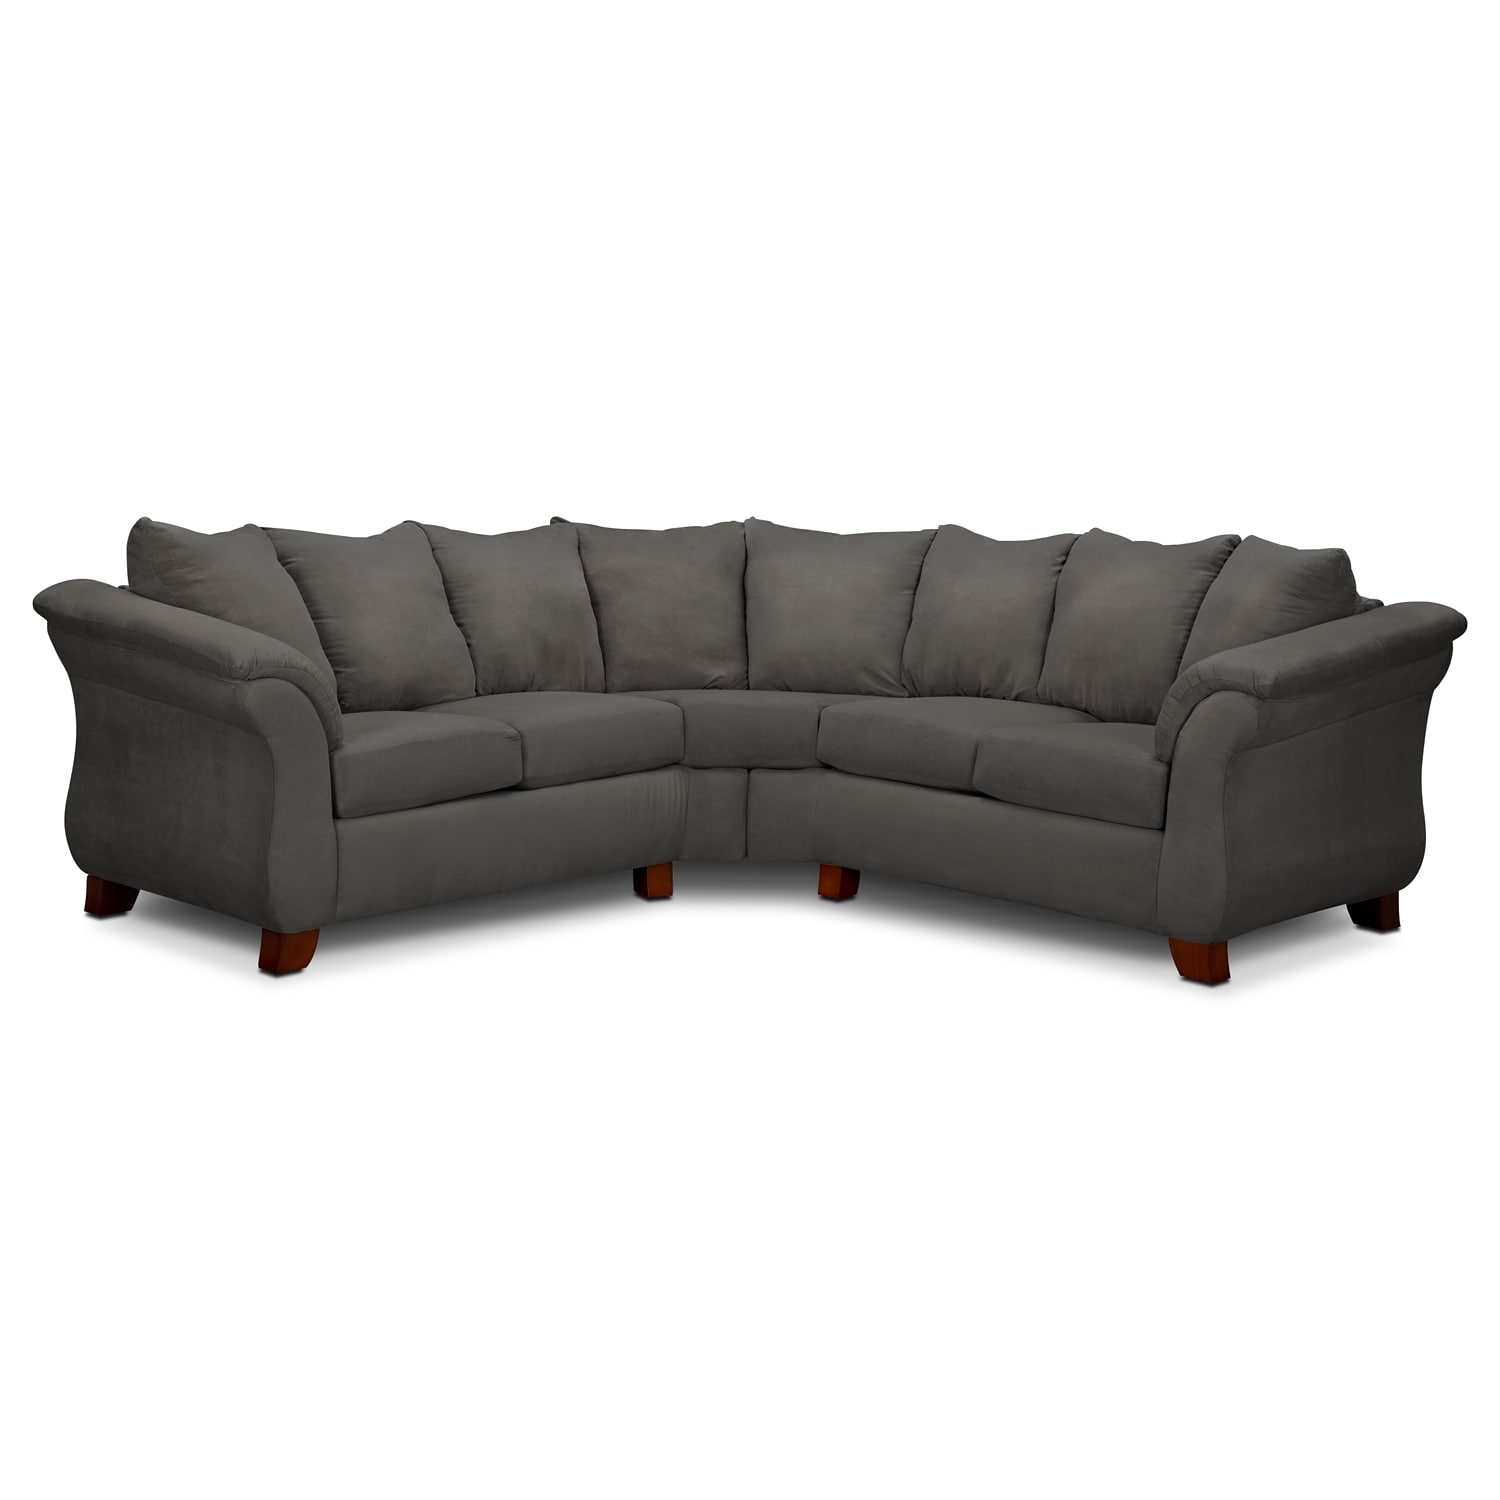 Adrian Graphite II 2 Pc. Sectional | Value City Furniture